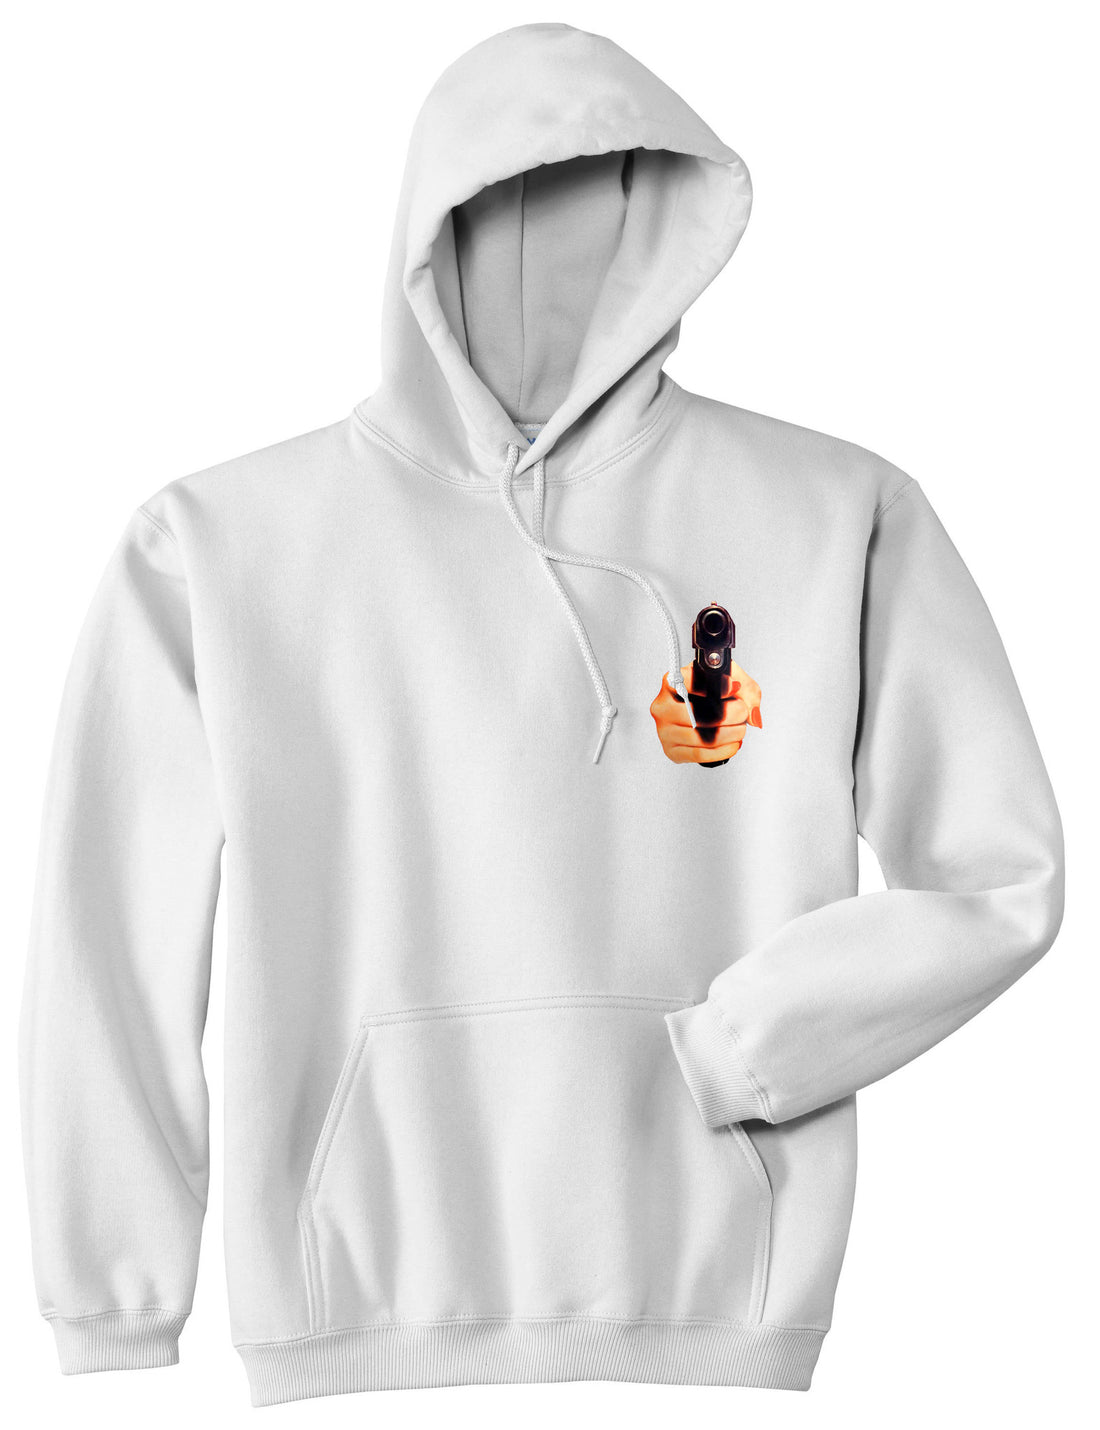 Hand Gun Women Girls Sexy Hot Tough Boys Kids Pullover Hoodie Hoody in White by Kings Of NY